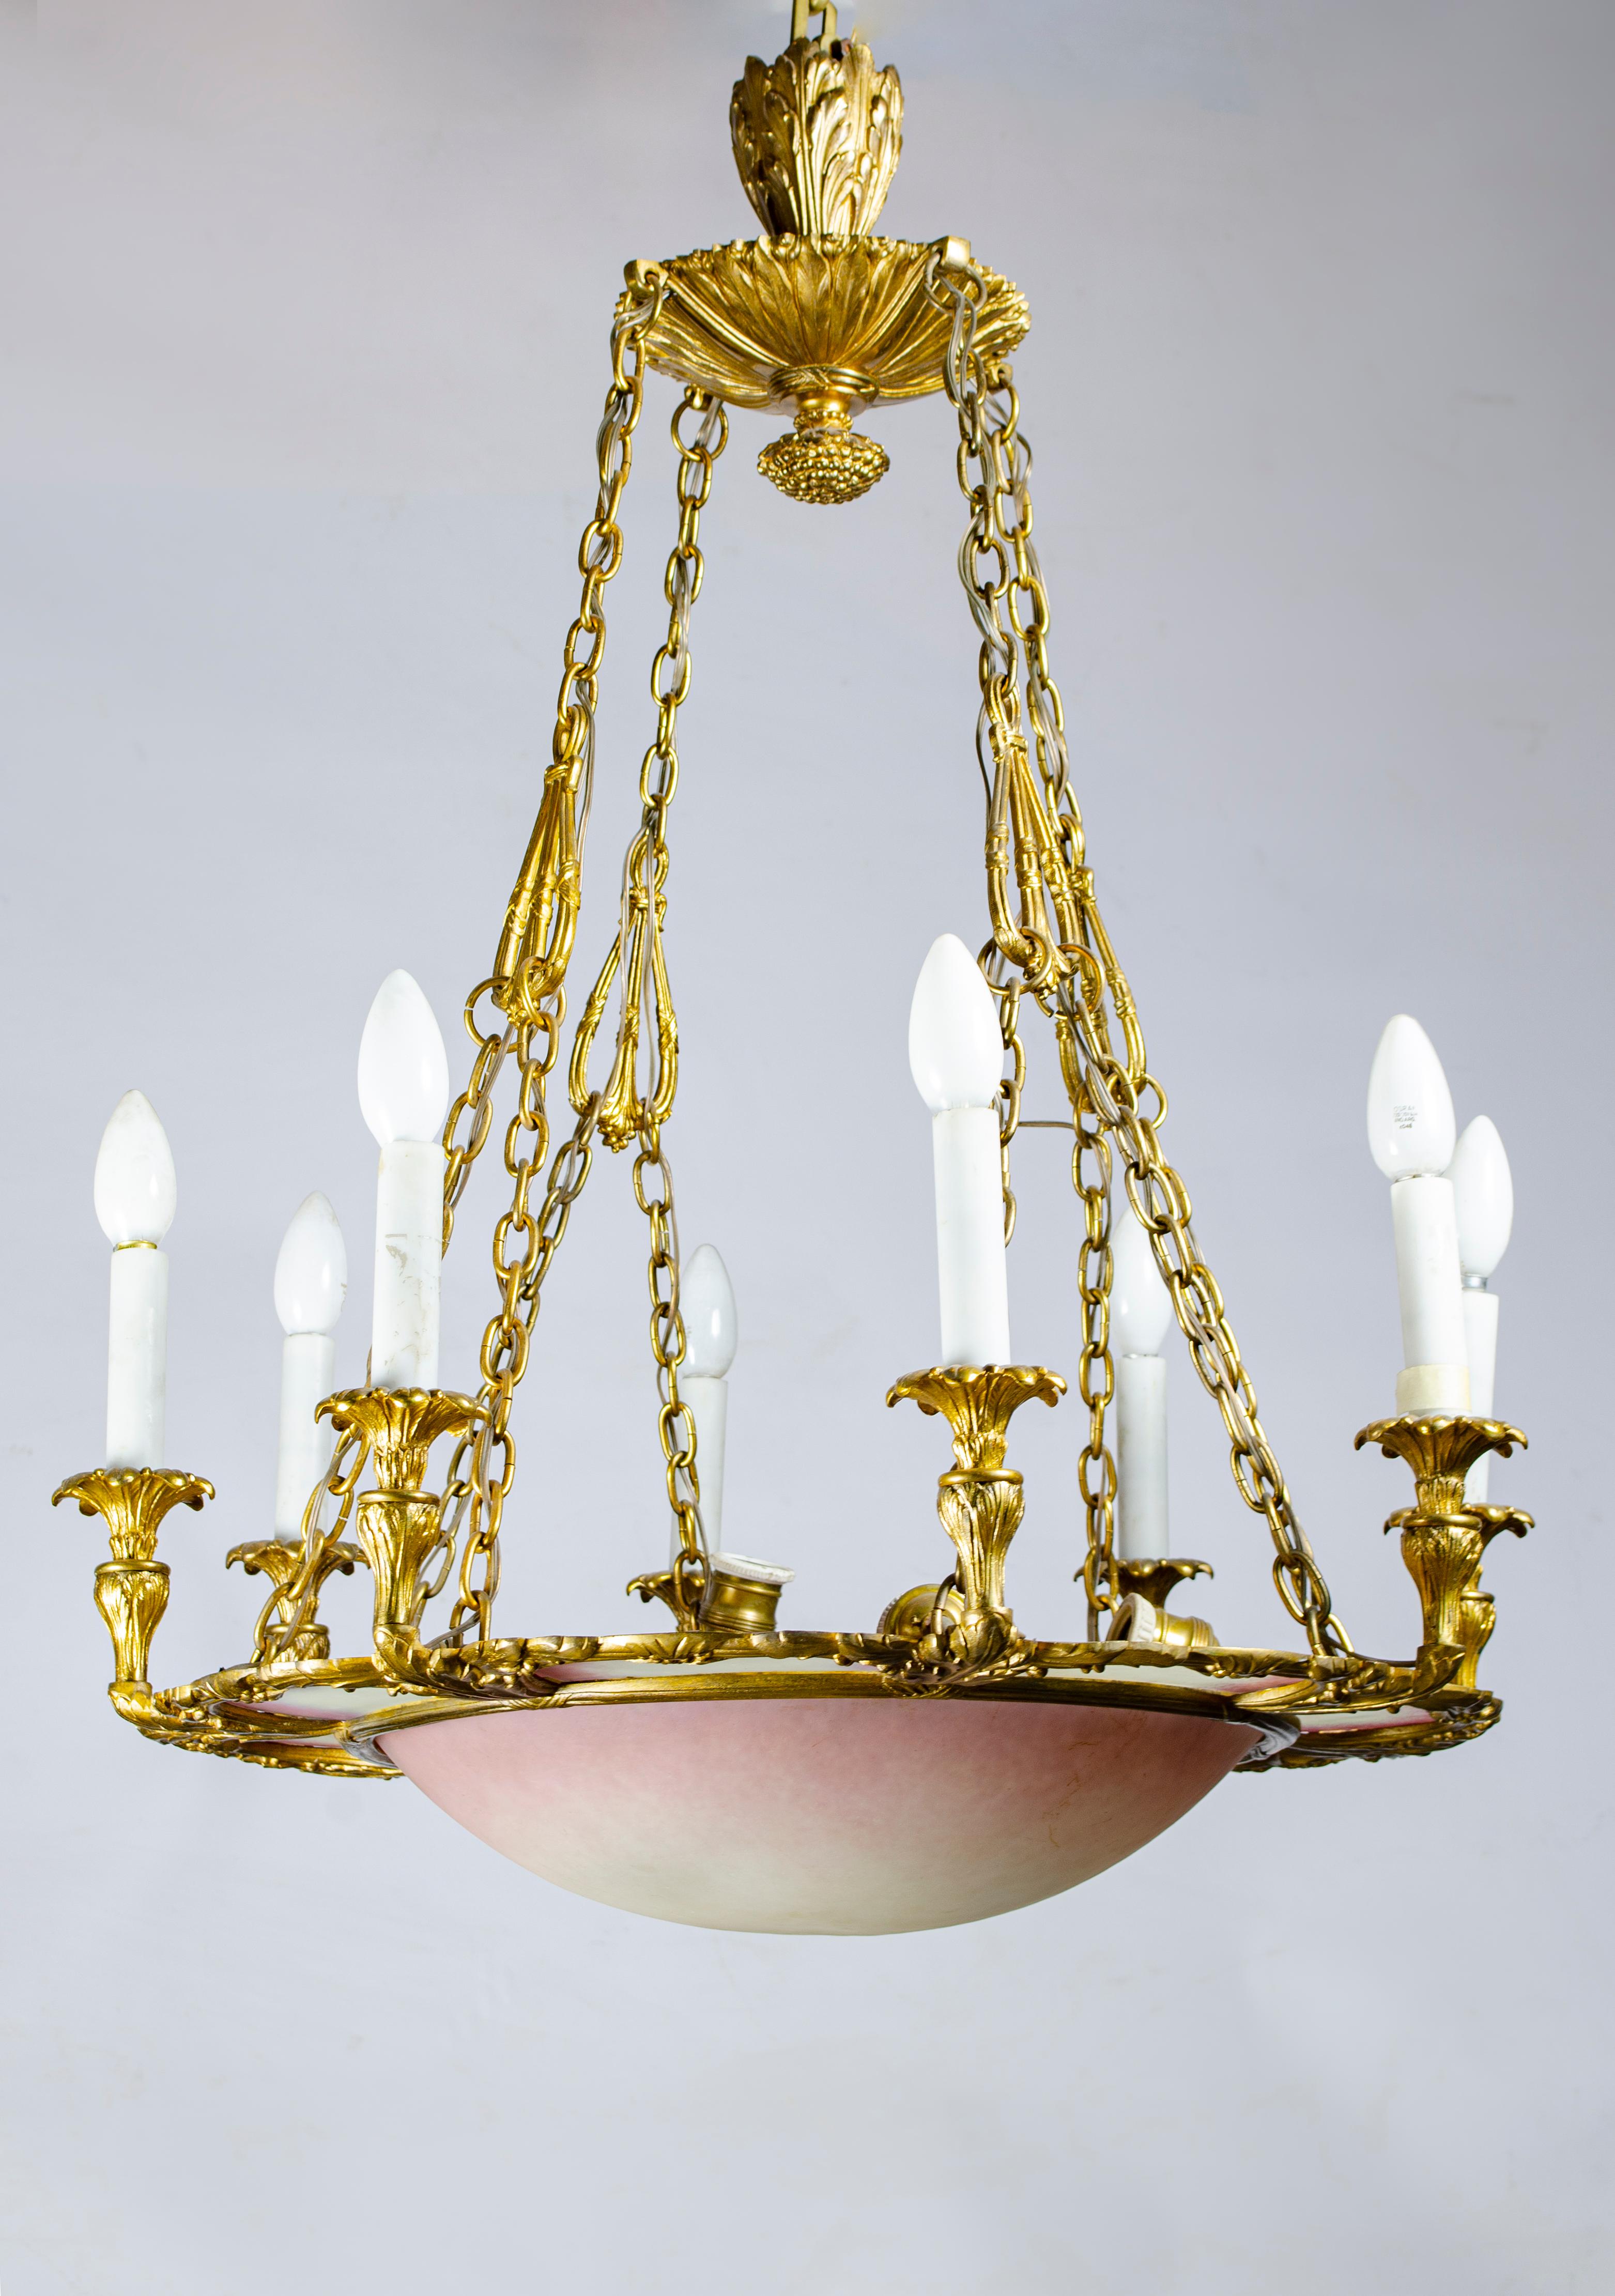 French style Louis XV chandelier
Materials: Bronze and glass paste
Ormolu
Electrified at 220 w
Perfect condition Origin France
Origin France Circa 1920
It has 8 external lights and two inside the ceiling.
Louis XV Style (in French, Louis Quinze) is